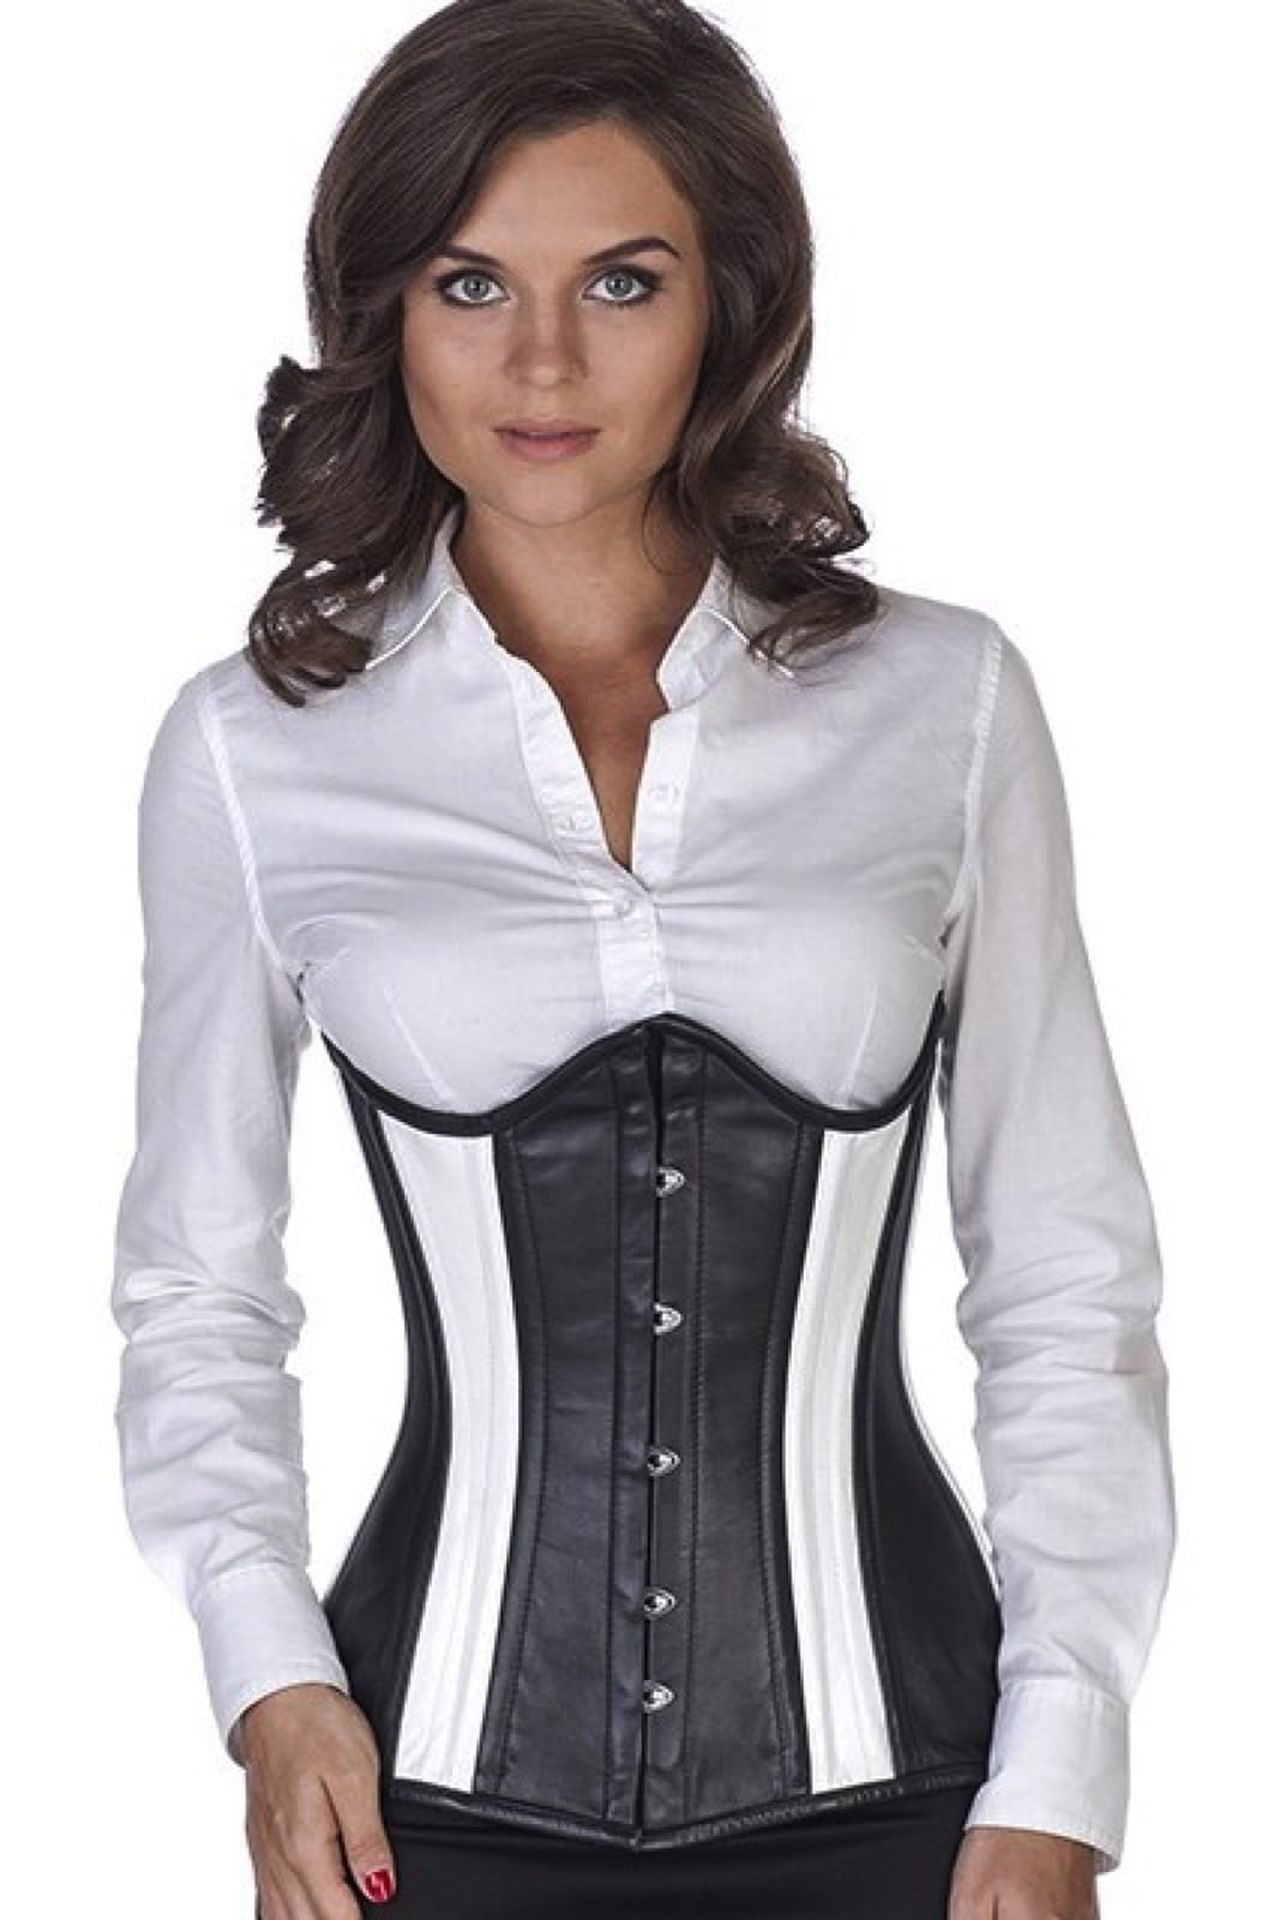 Corset black white leather curved underbust ln35